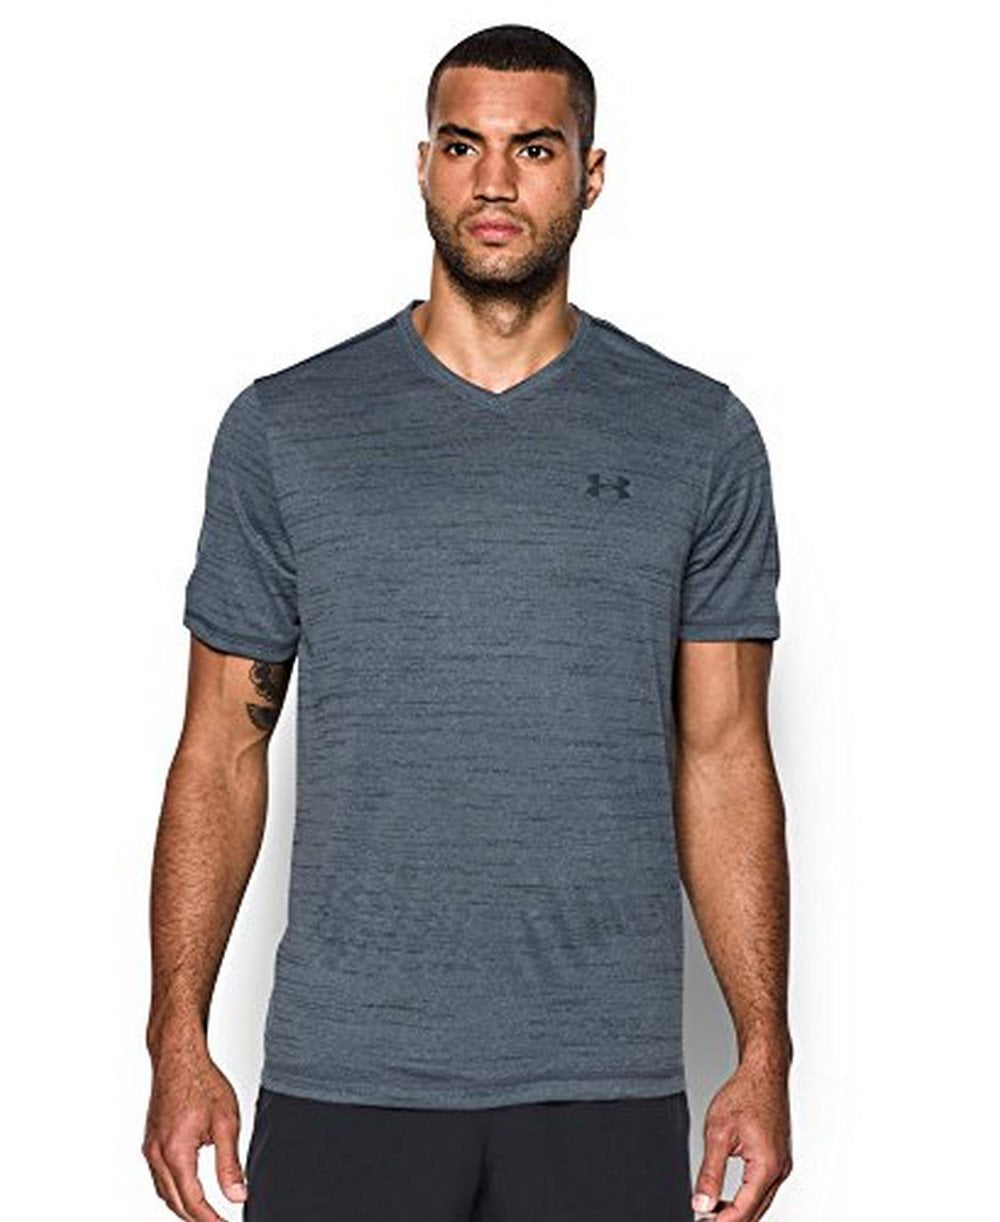 Under Armour - Under Armour Mens STEALTH GRAY-STEALTH GRAY MD - Walmart ...